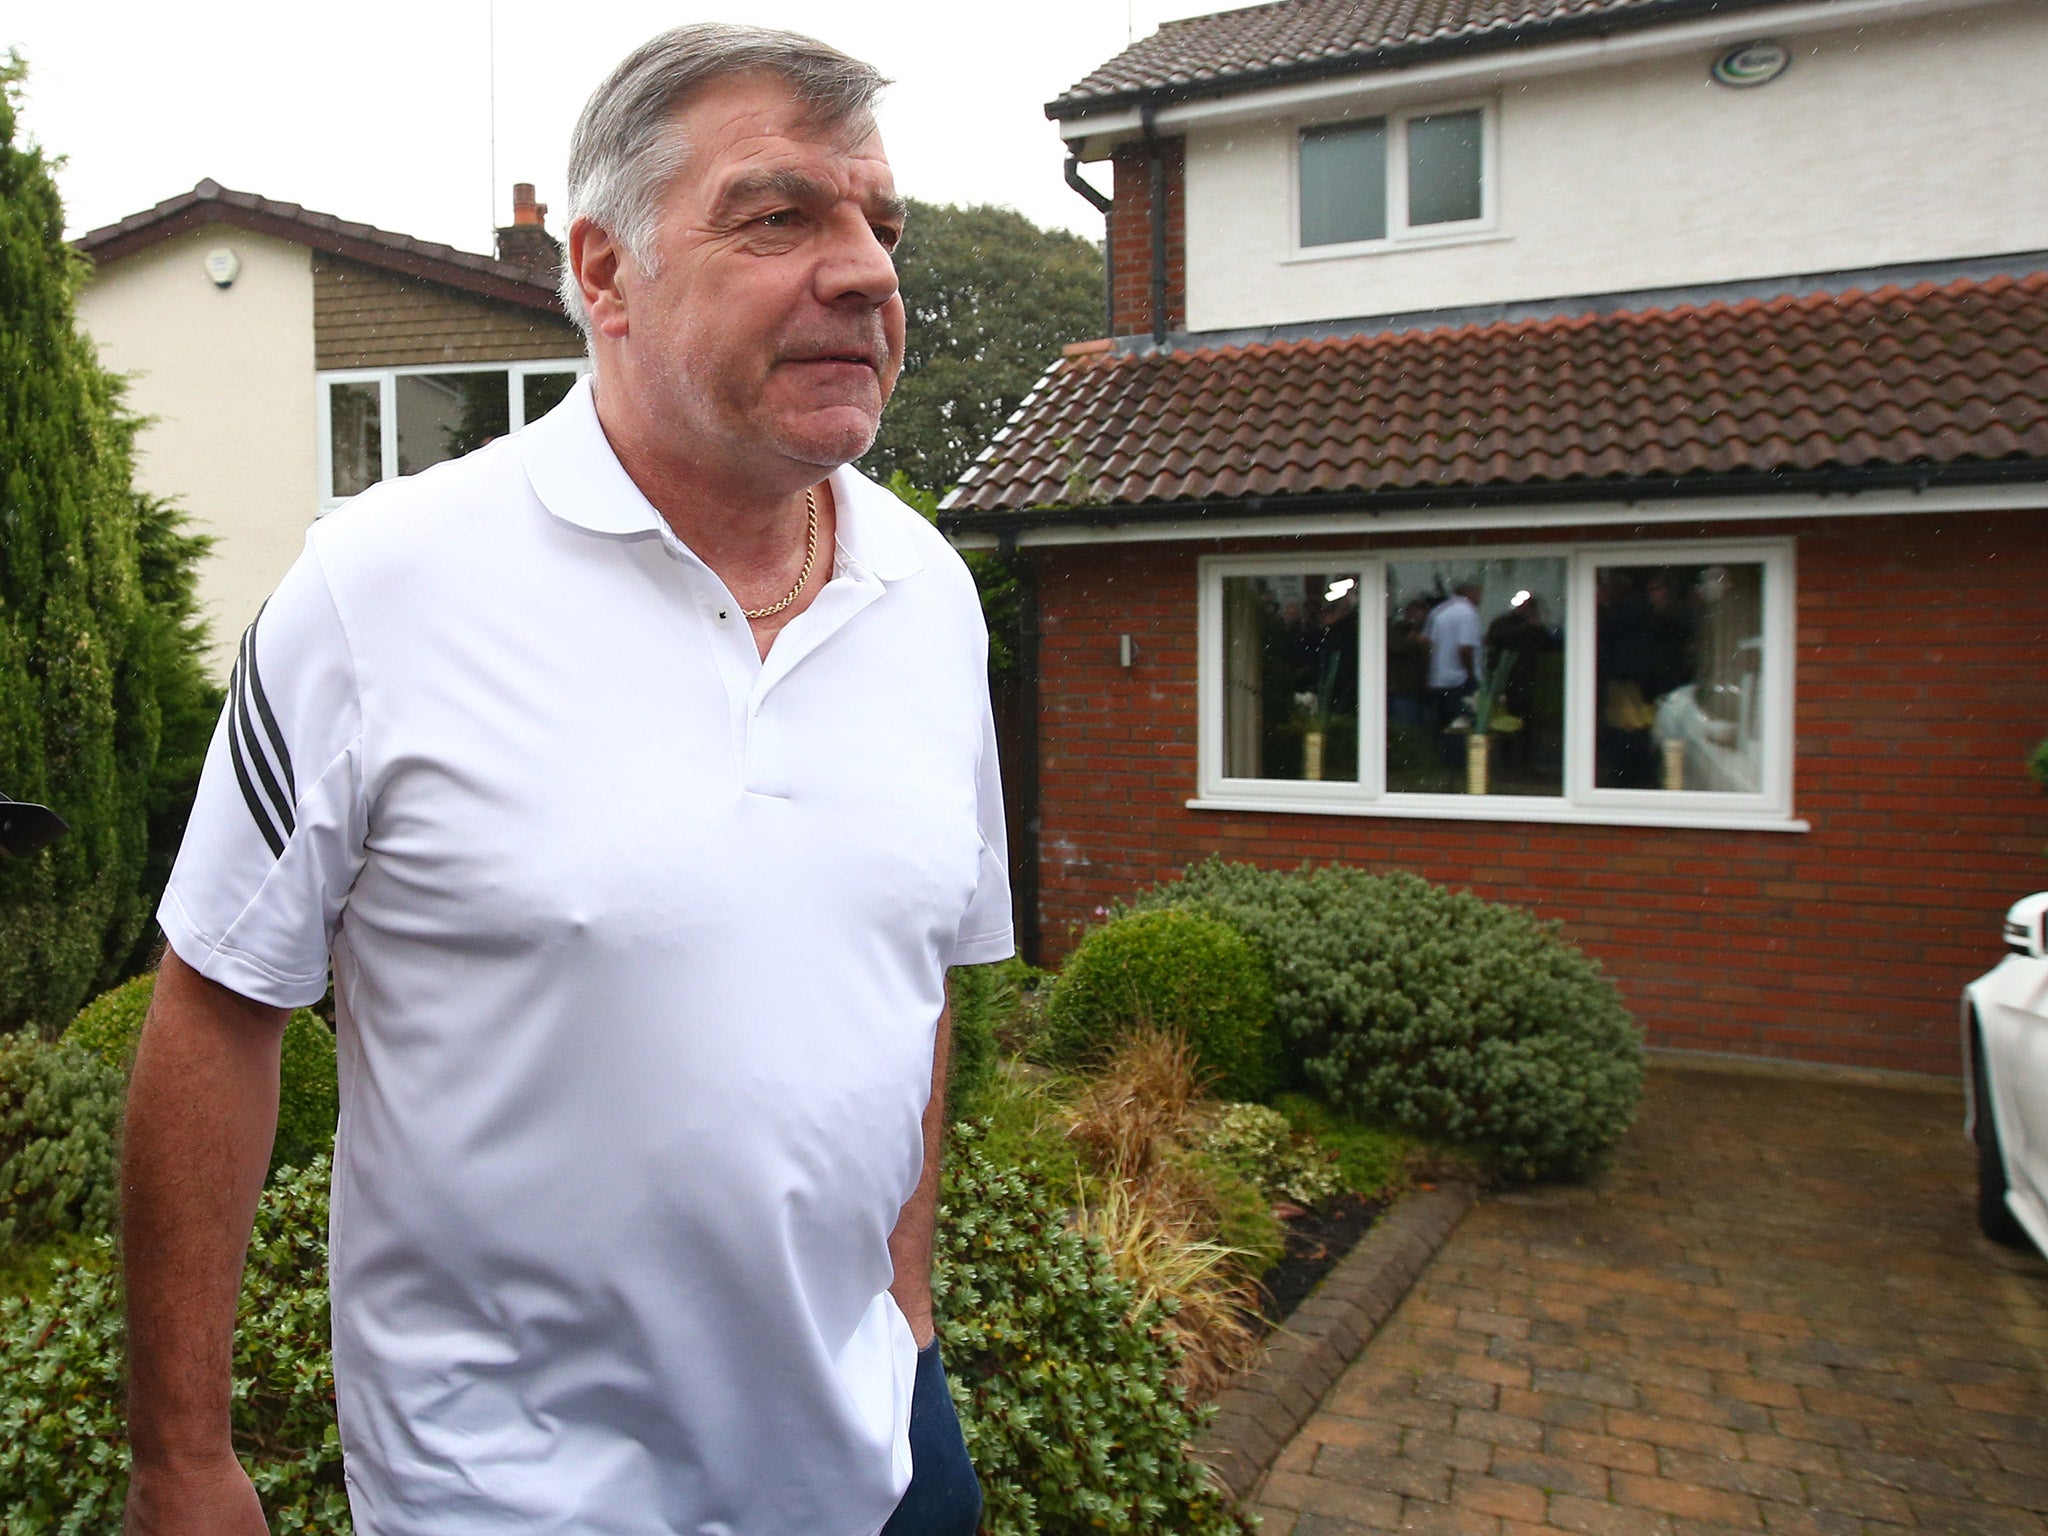 Sam Allardyce agreed a seven-figure pay-out fee with the FA after resigning as England manager